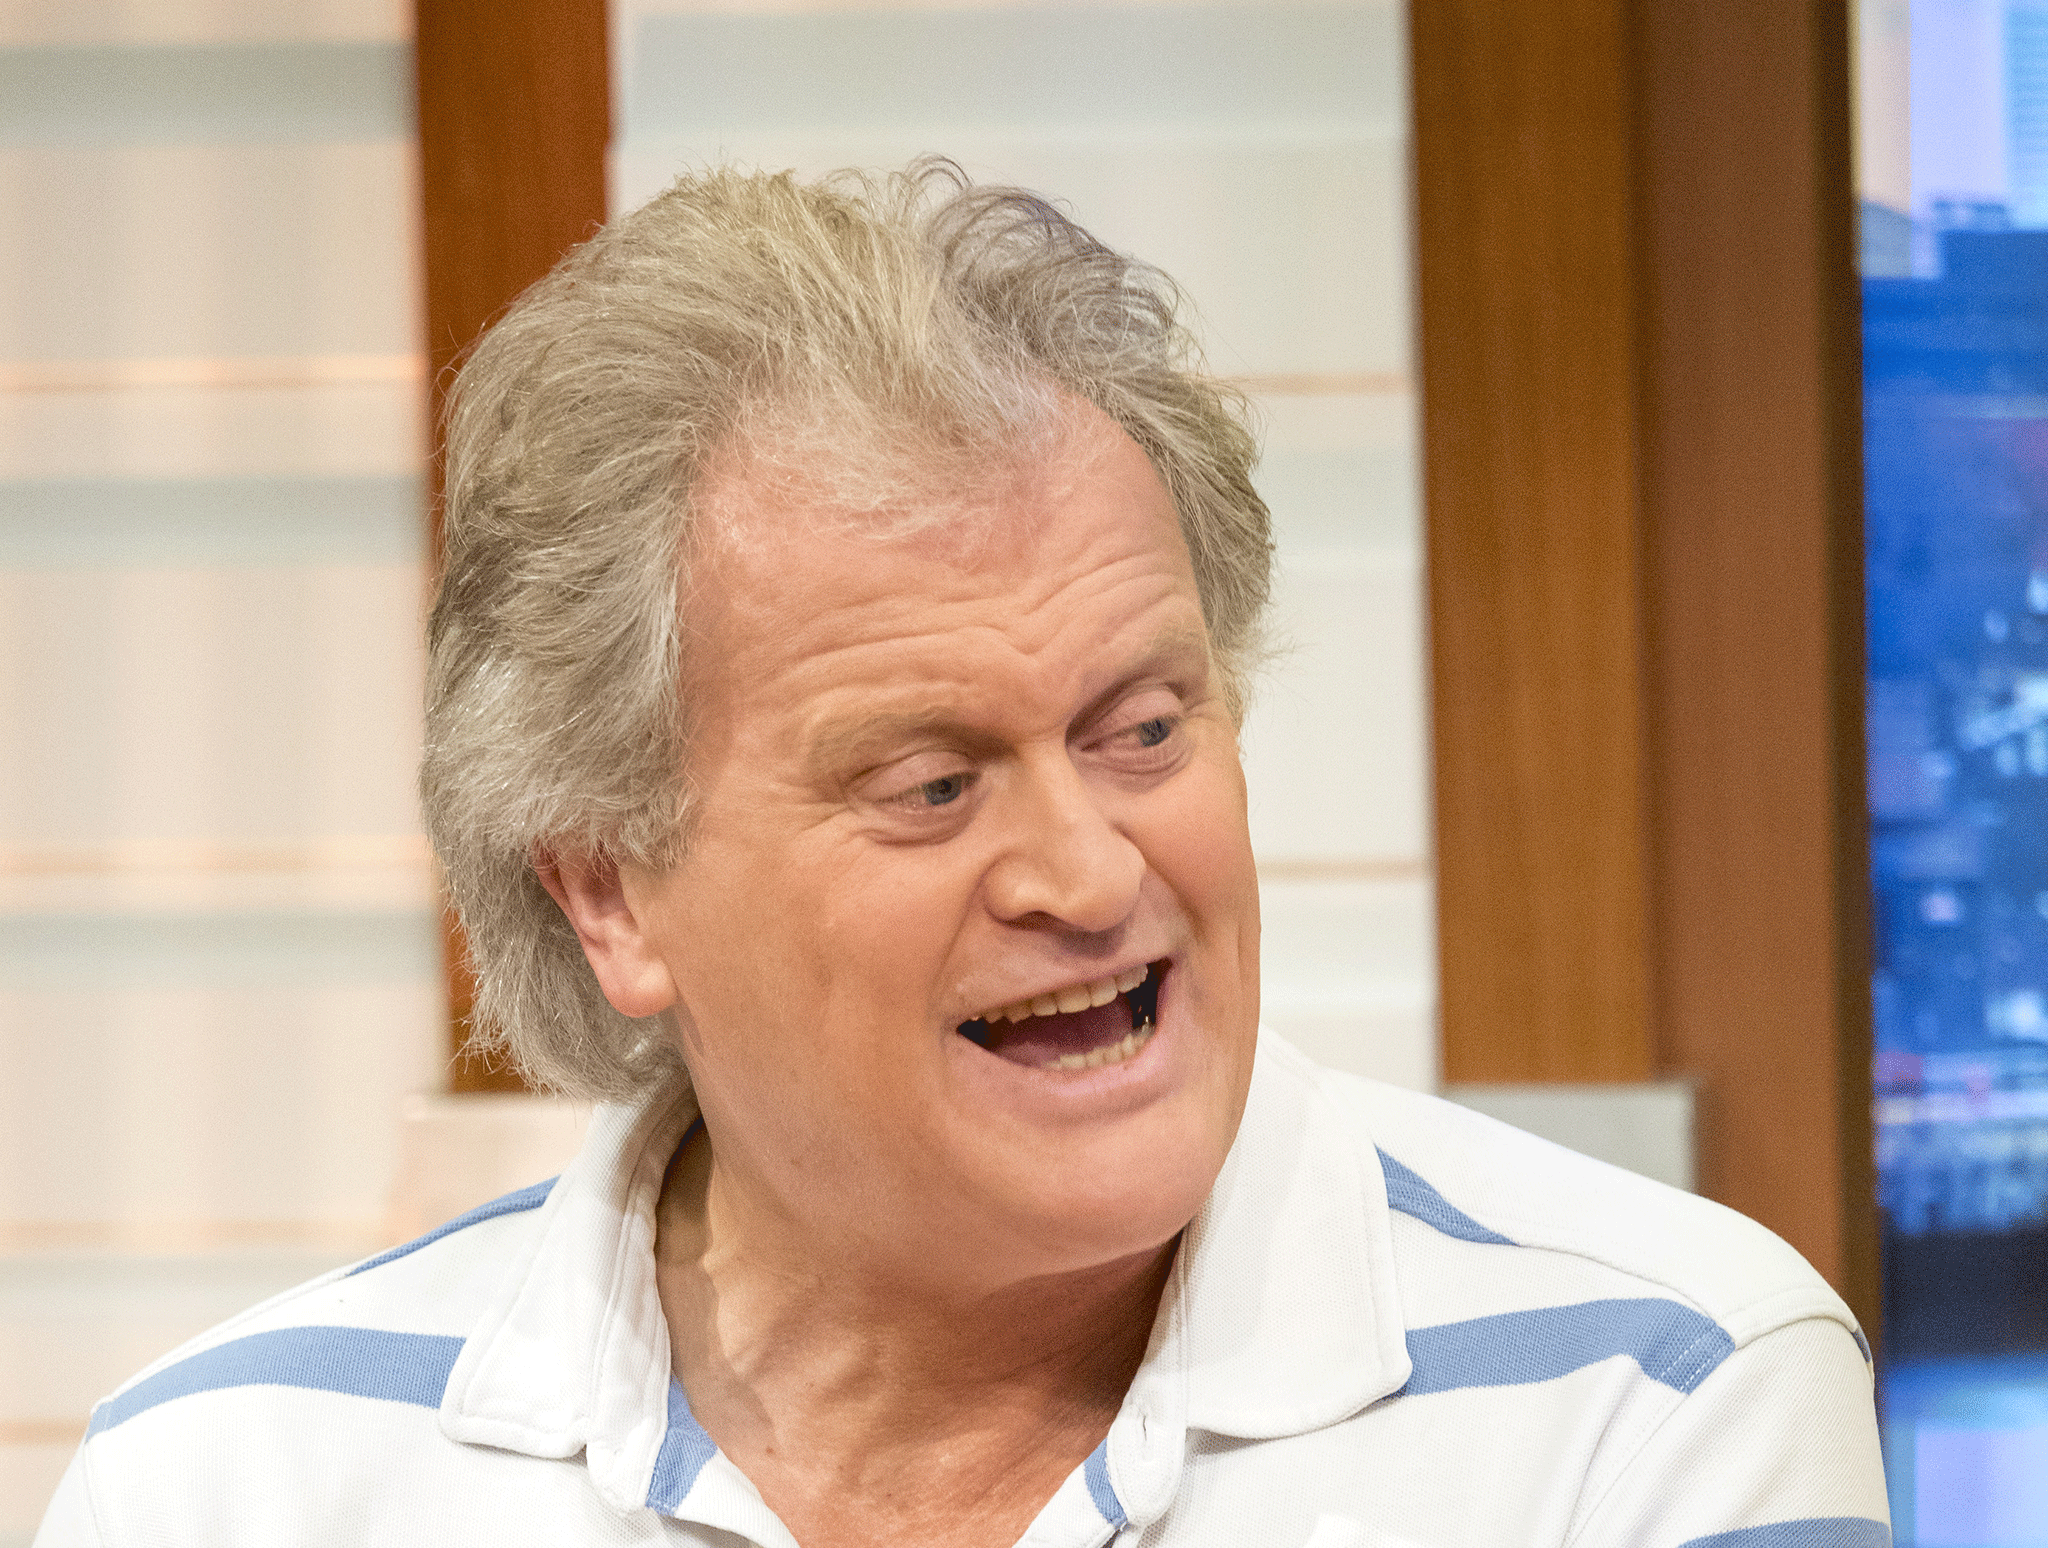 Since the Brexit vote, chairman Tim Martin has accused the EU of bullying the UK